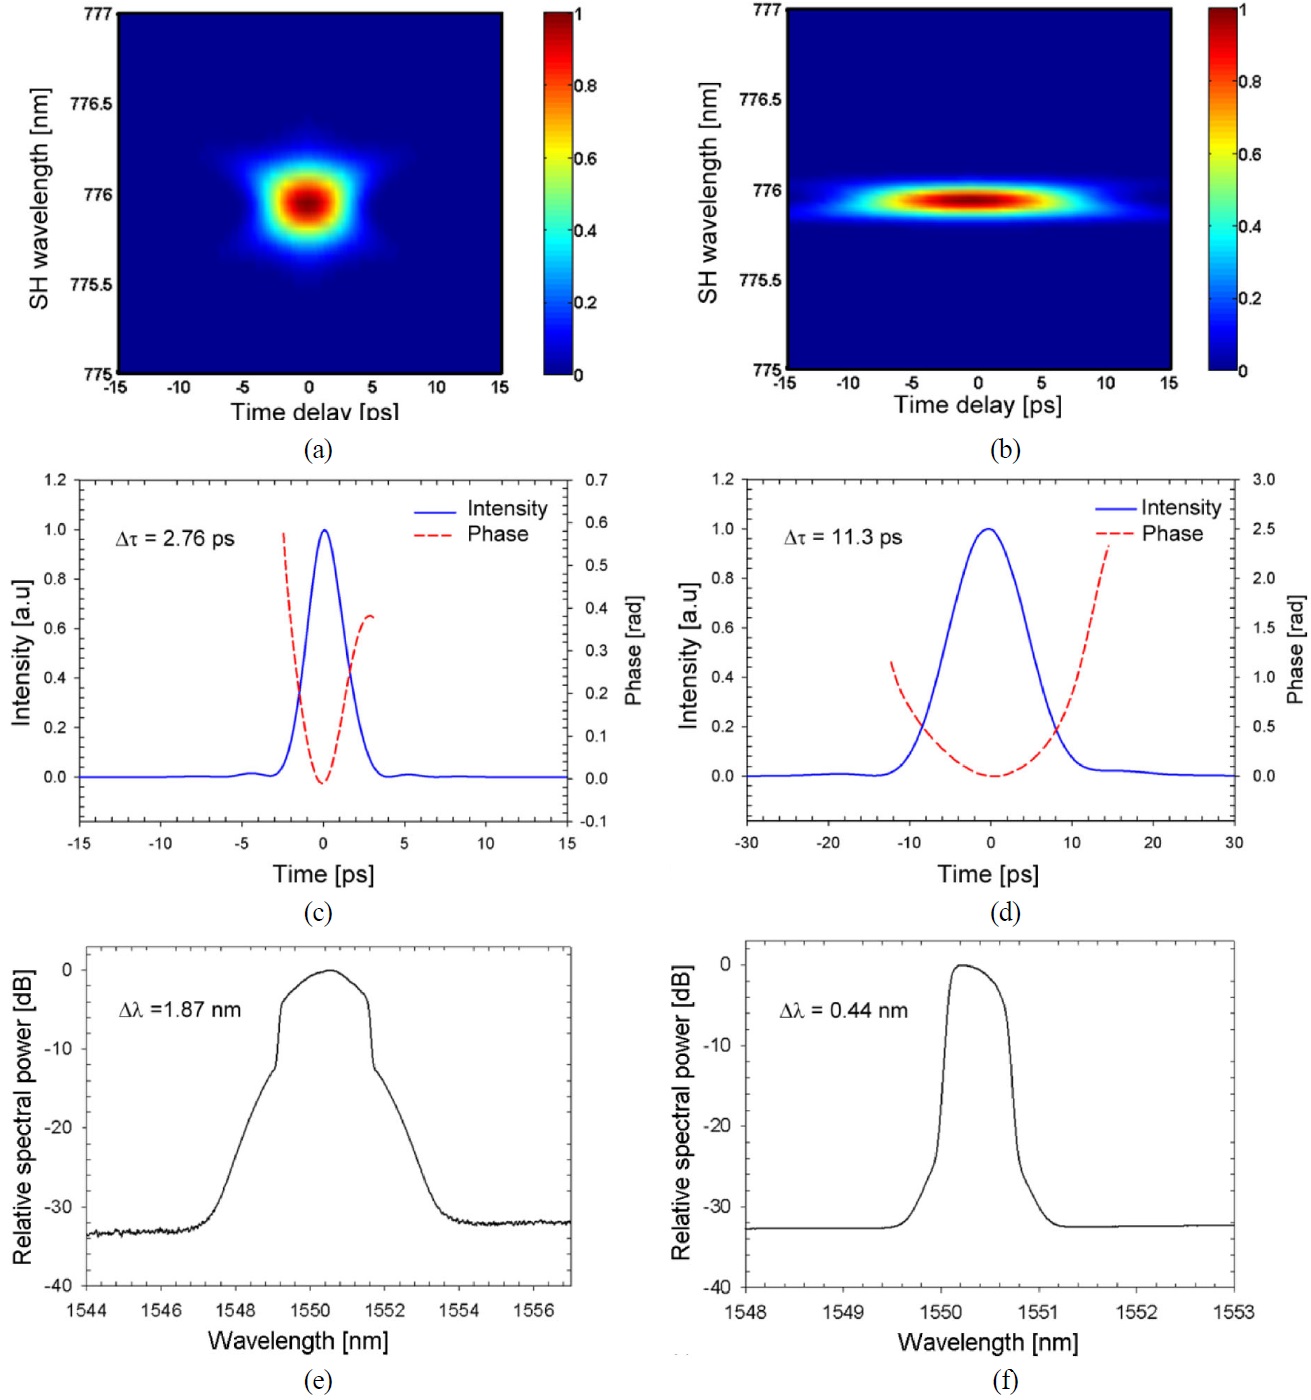 (a) and (b): Measured FROG traces. (c) and (d): Retrieved intensity and phase as a function of time. (e) and (f): Measured optical spectra for ΔλF = 7 nm (left) and ΔλF = 1.5 nm (right). SH: second harmonic.